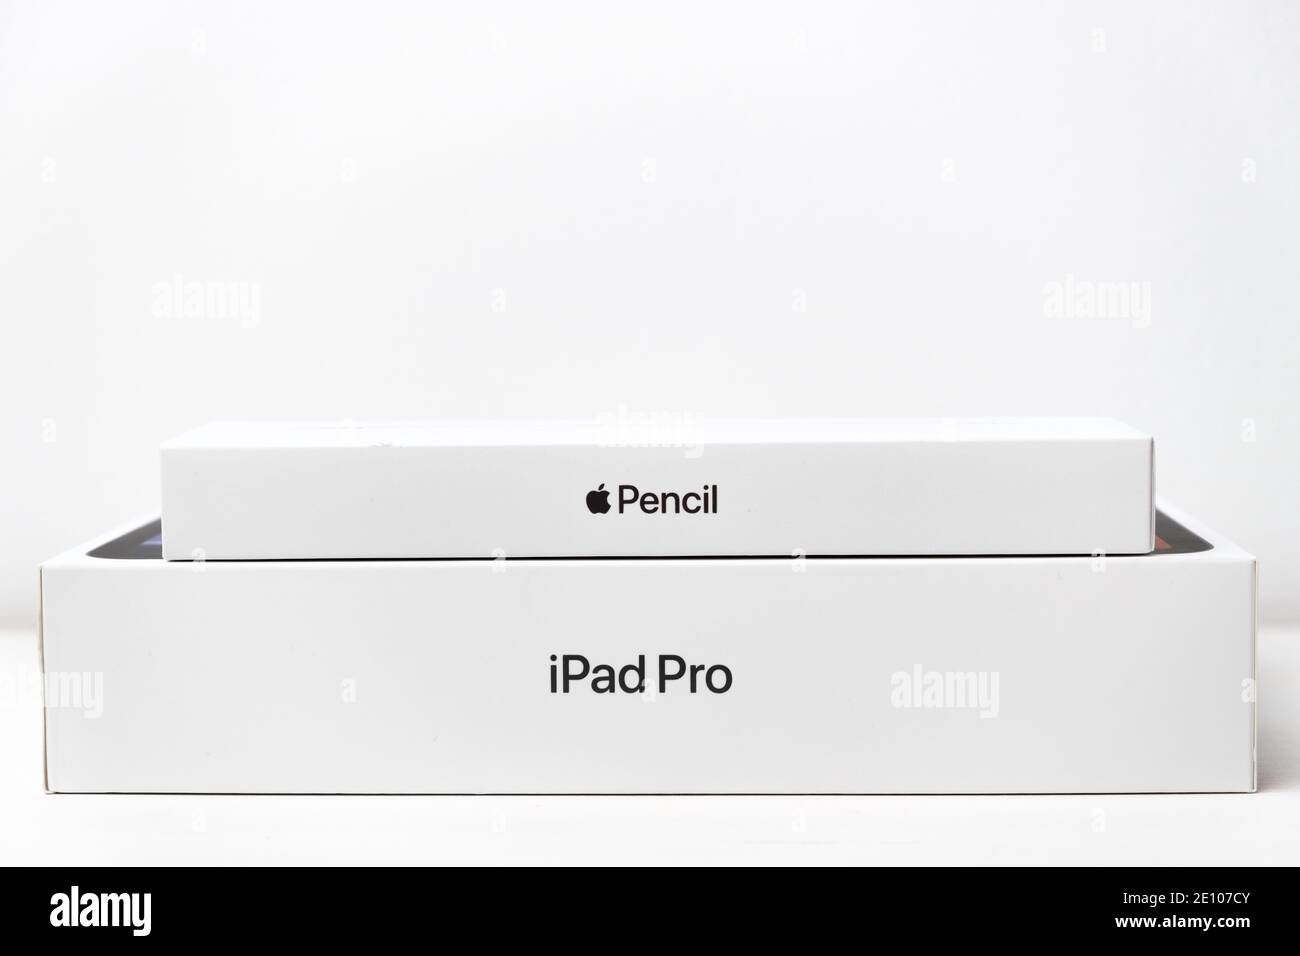 Apple pencil and iPad Pro boxes isolated on the white background, December 2020, San Francisco, USA Stock Photo